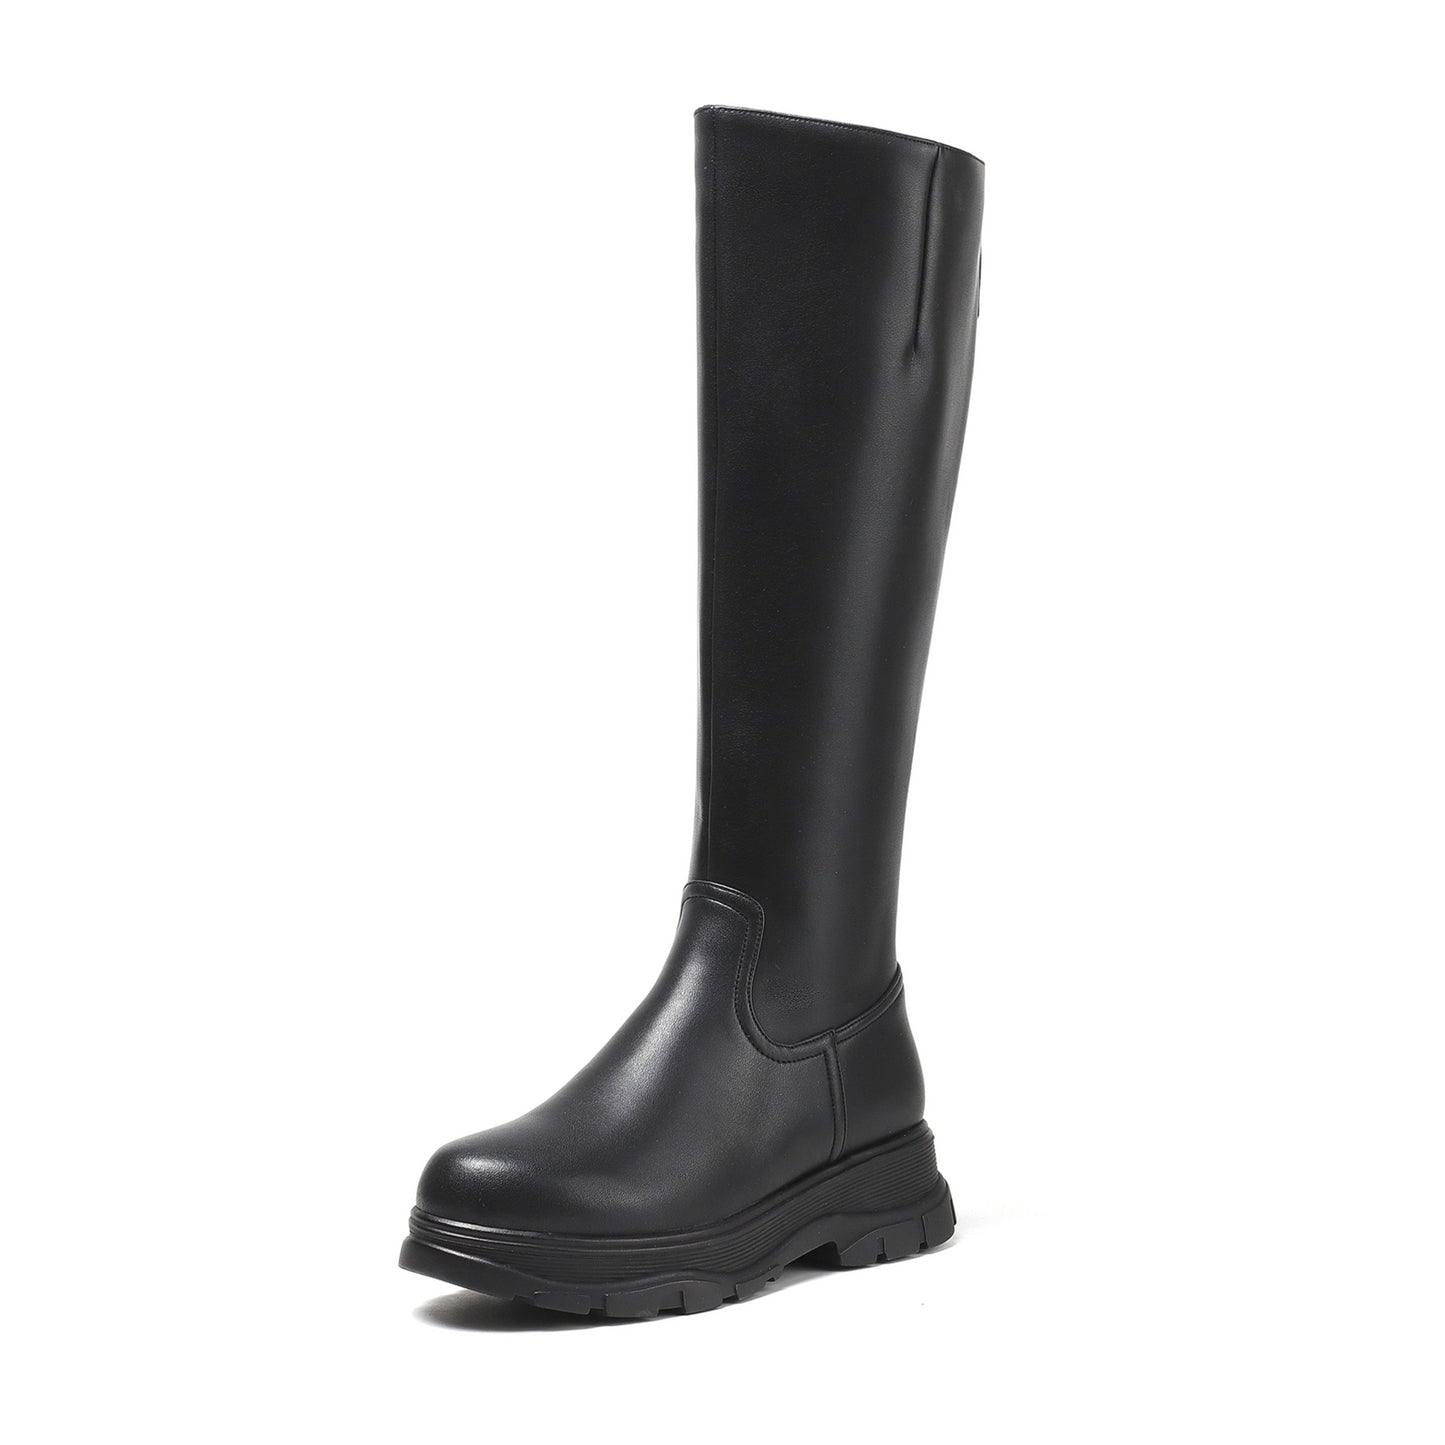 TinaCus Women's Genuine Leather Round Toe Handmade Zipper Classic Knee High Boots with Platform